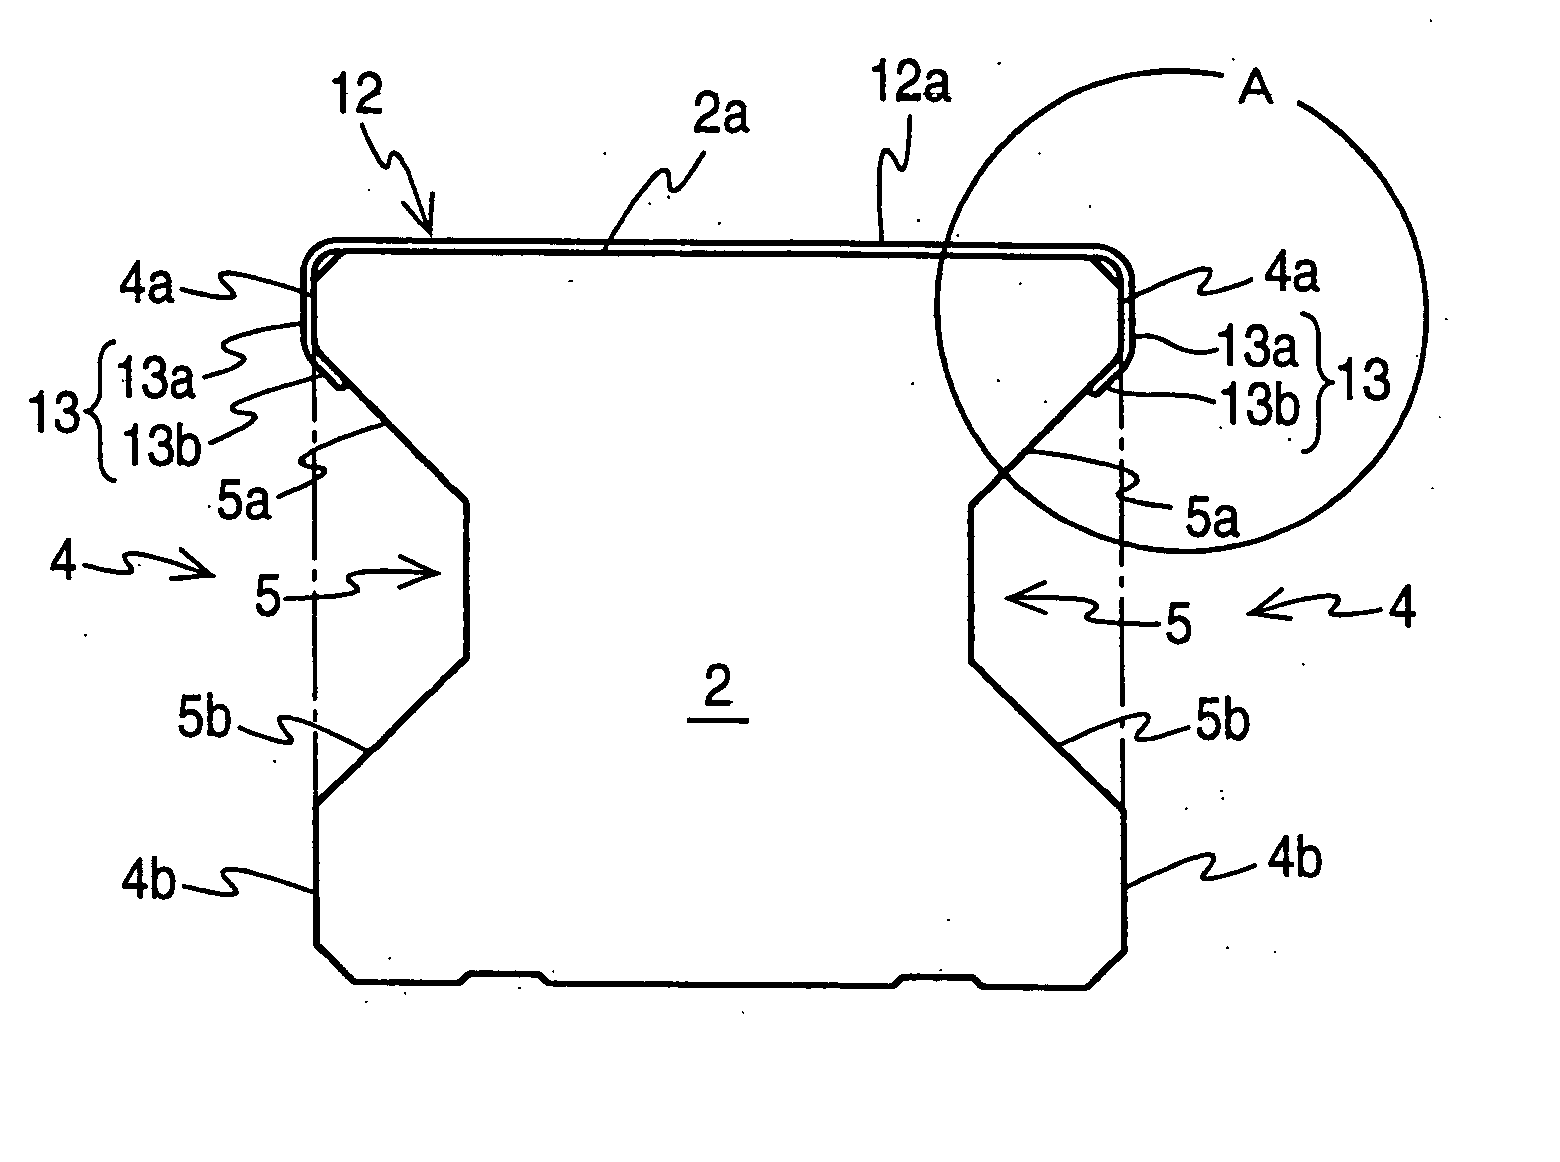 Linear guide device